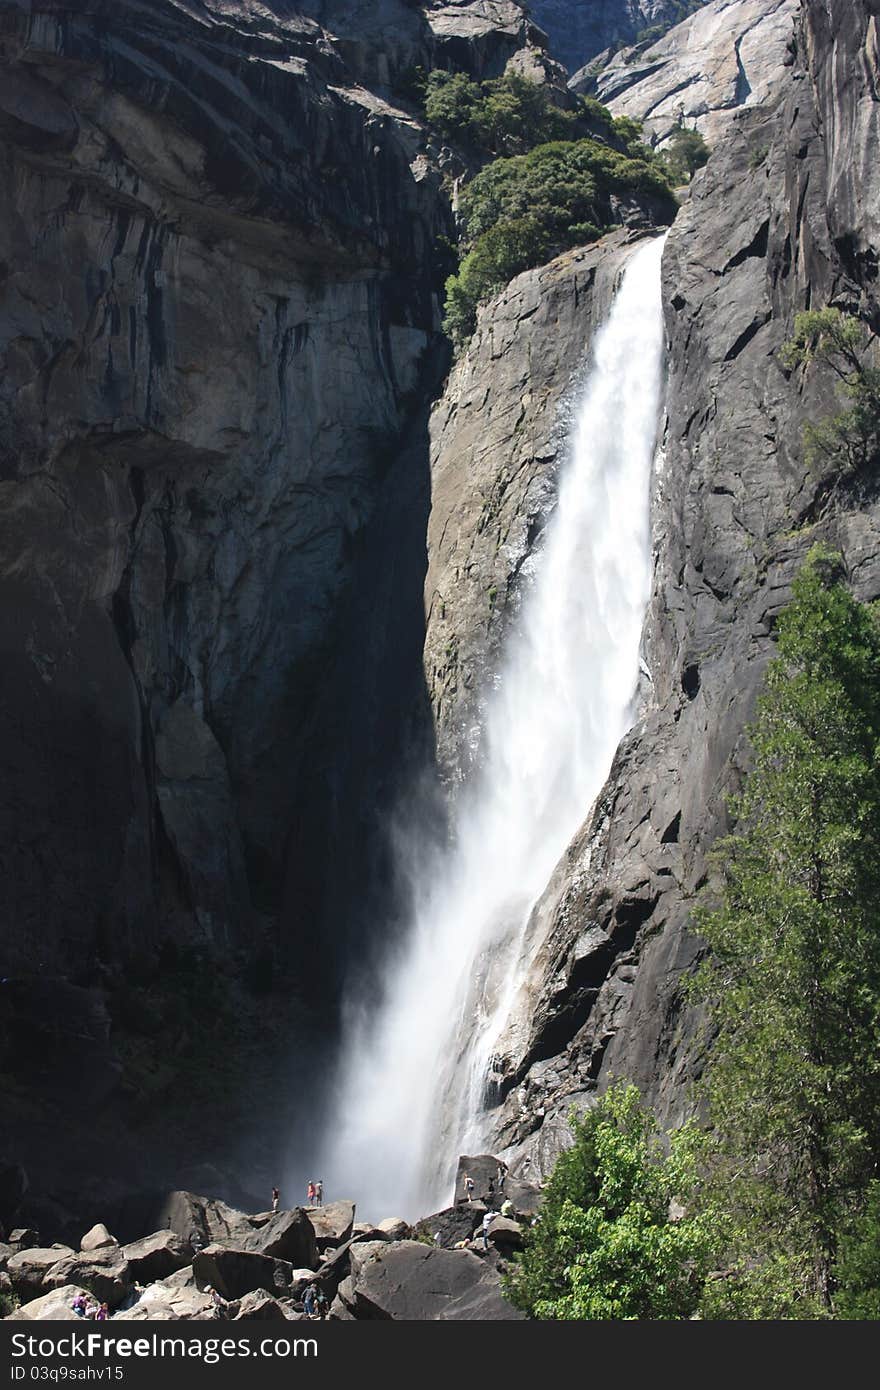 View of Lower Yosemite falls in the National Park